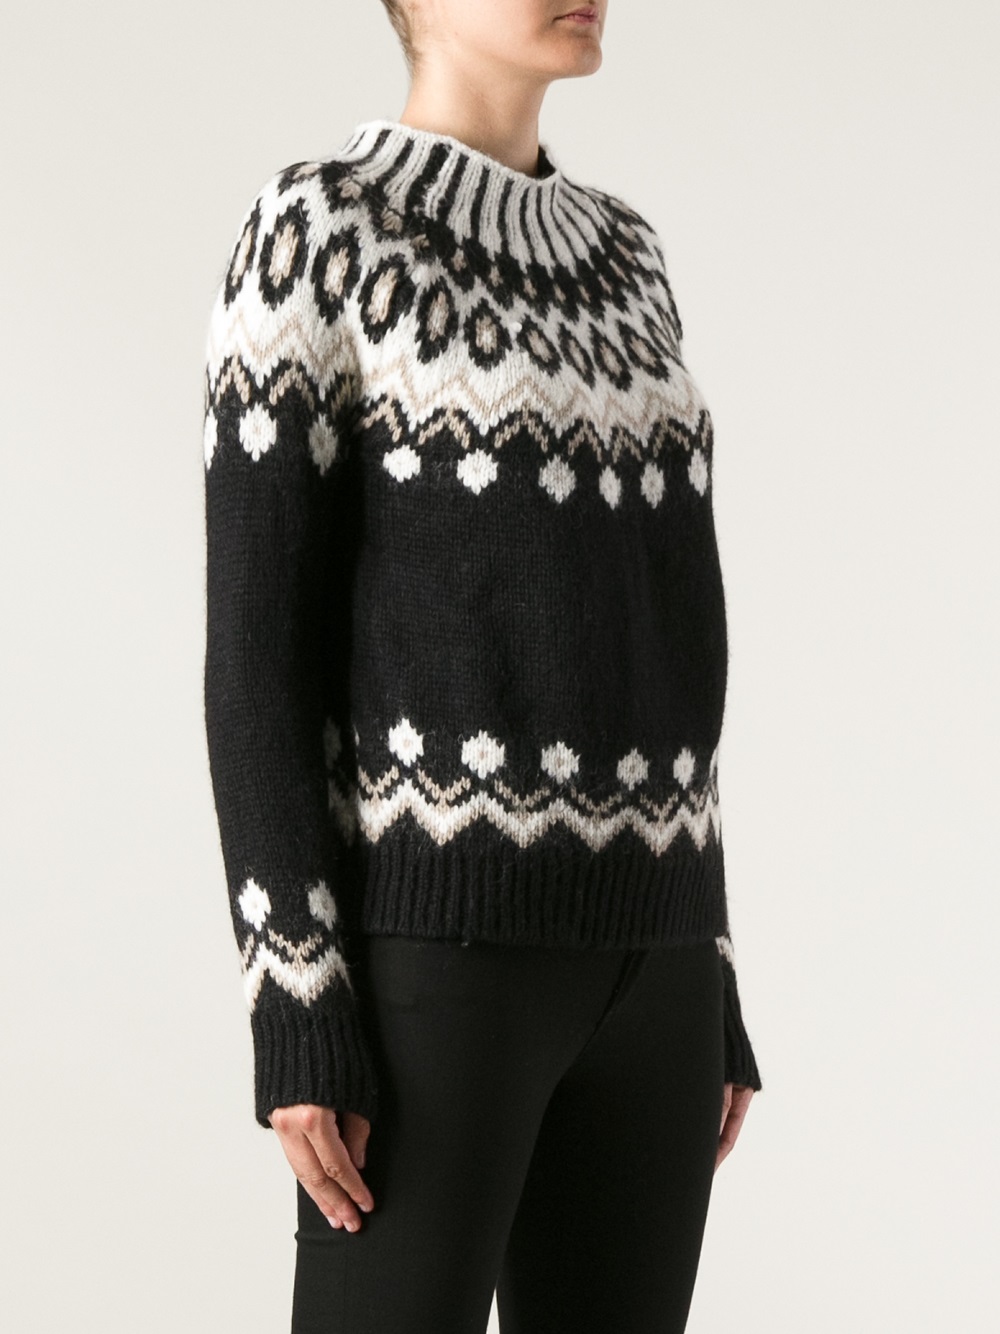 Lyst - Moncler Fair Isle Knit Sweater in Black